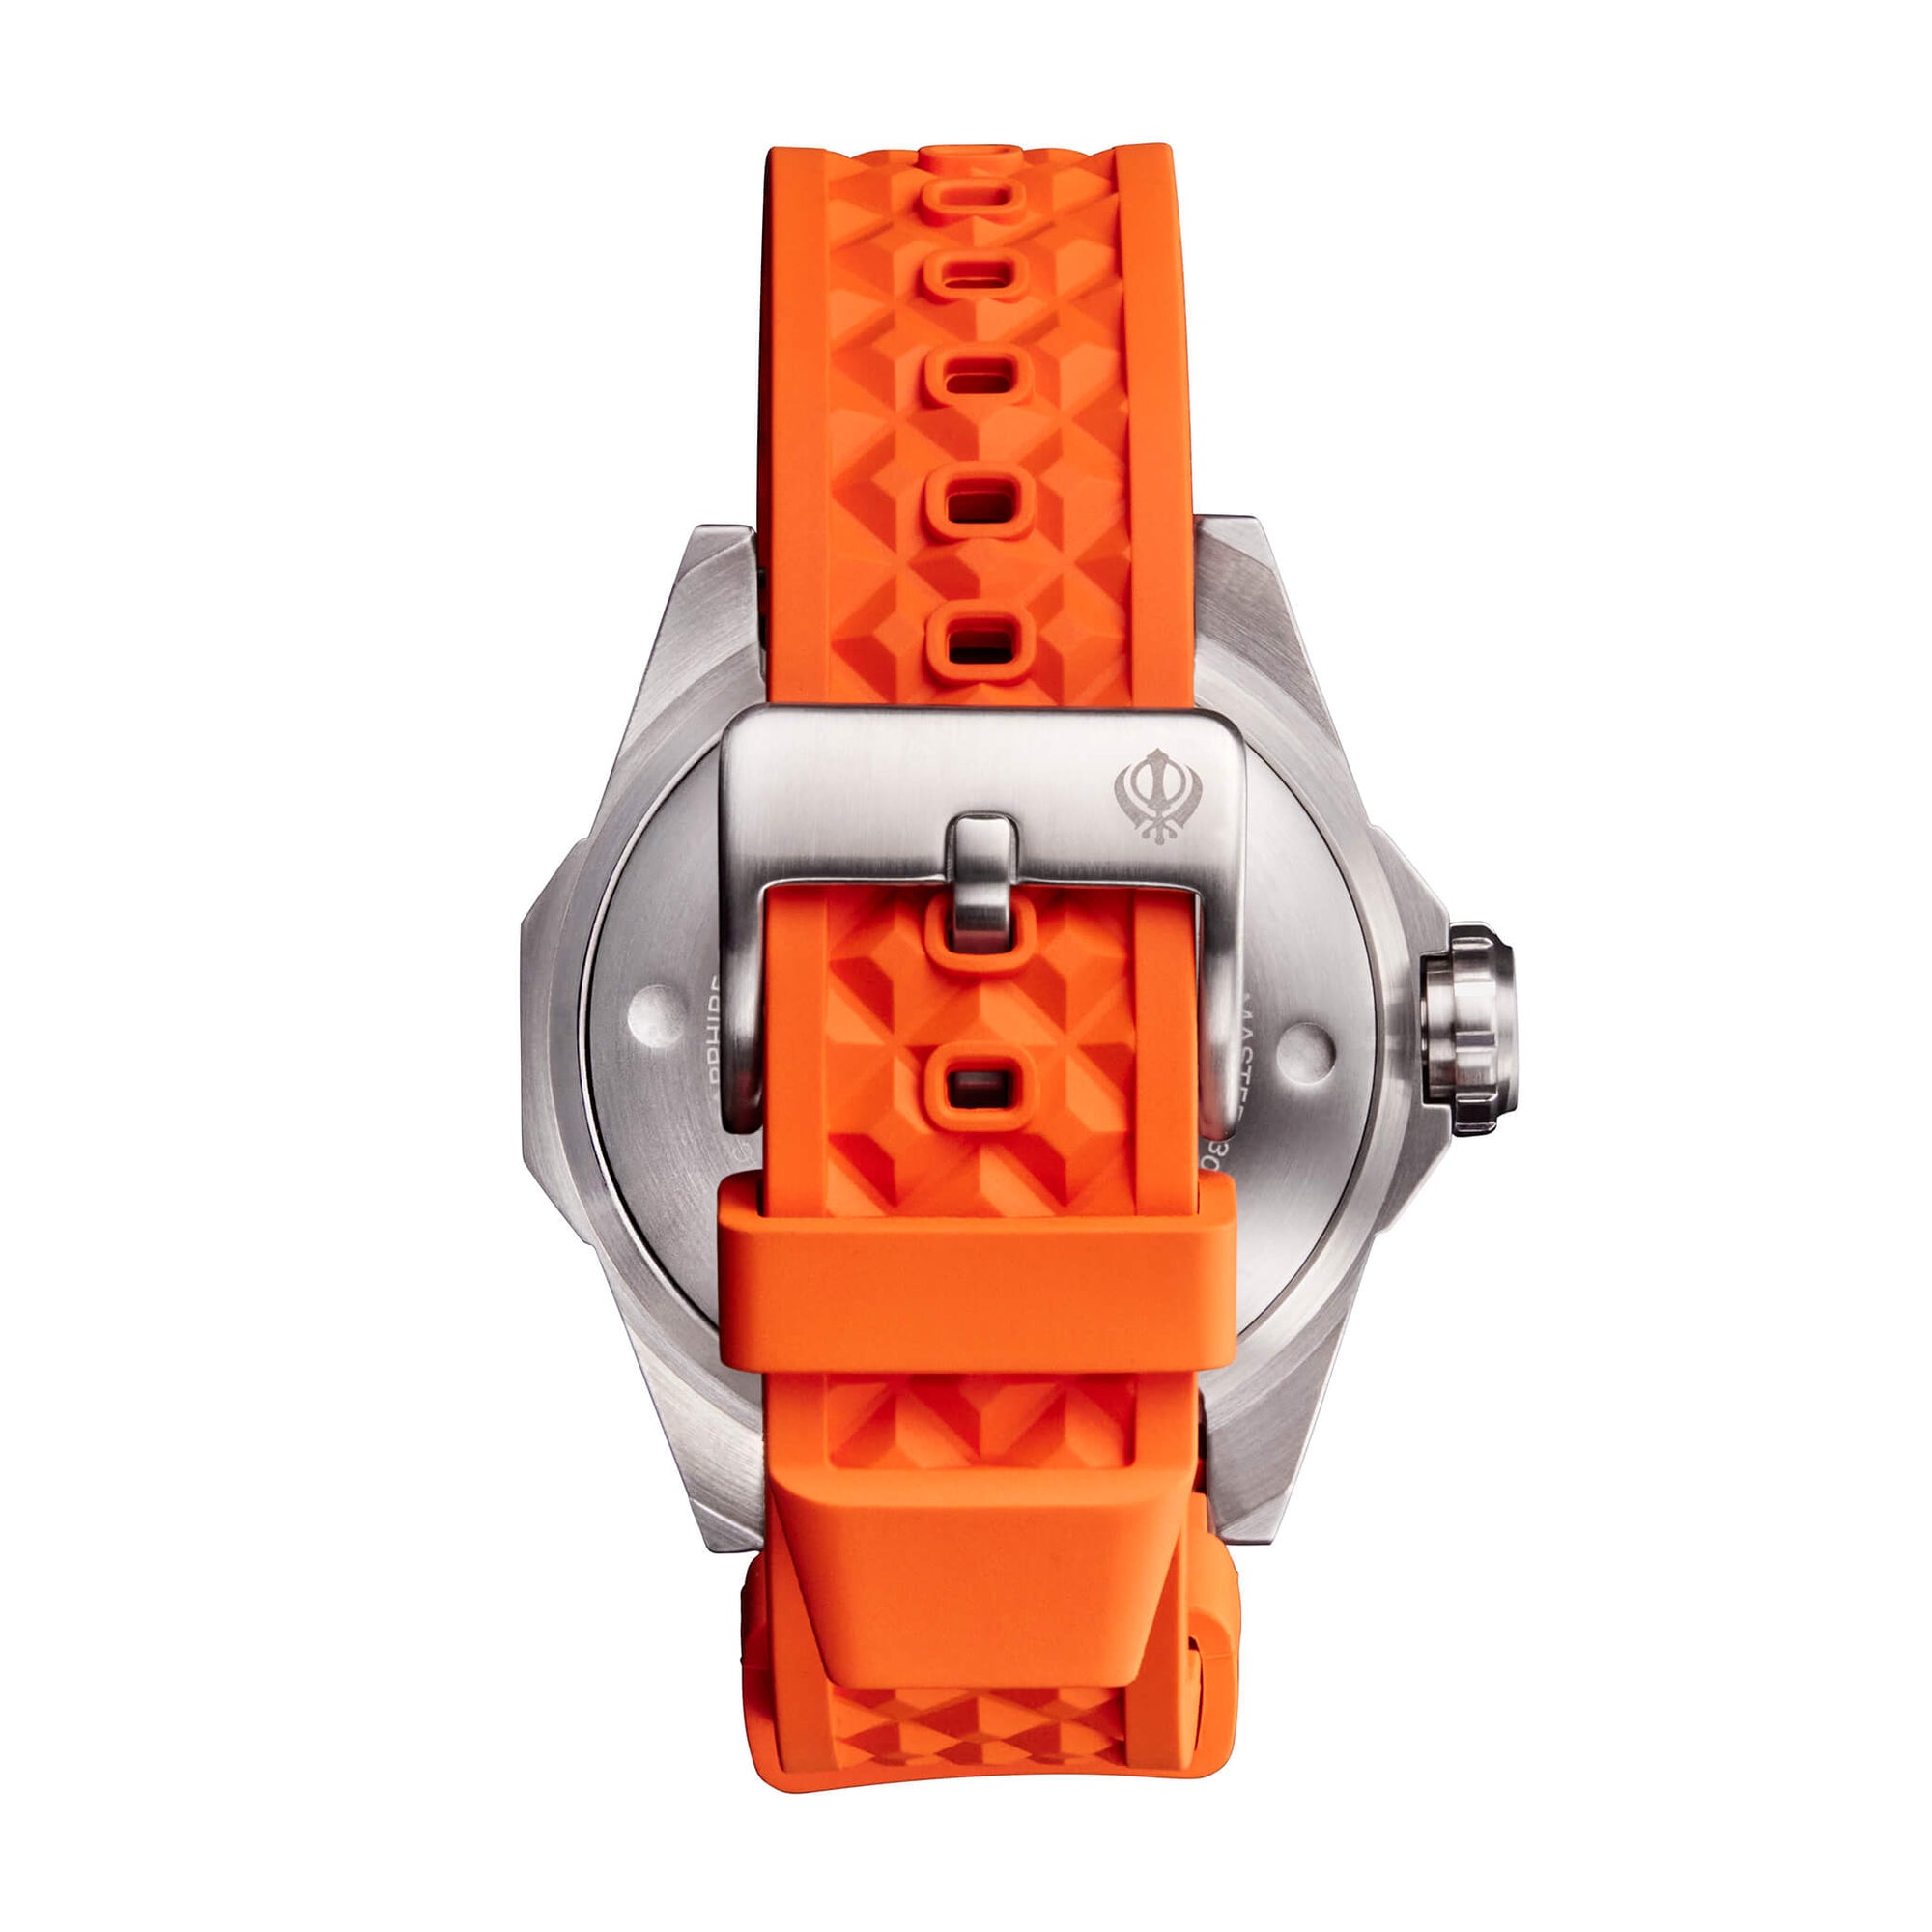 House of Khalsa Ocean Master Kesri Orange Luxury Sikh Swiss Dive Watch for Men with Khanda Symbol Stainless Steel Clasp and Orange Leather Strap - Perfect Gift